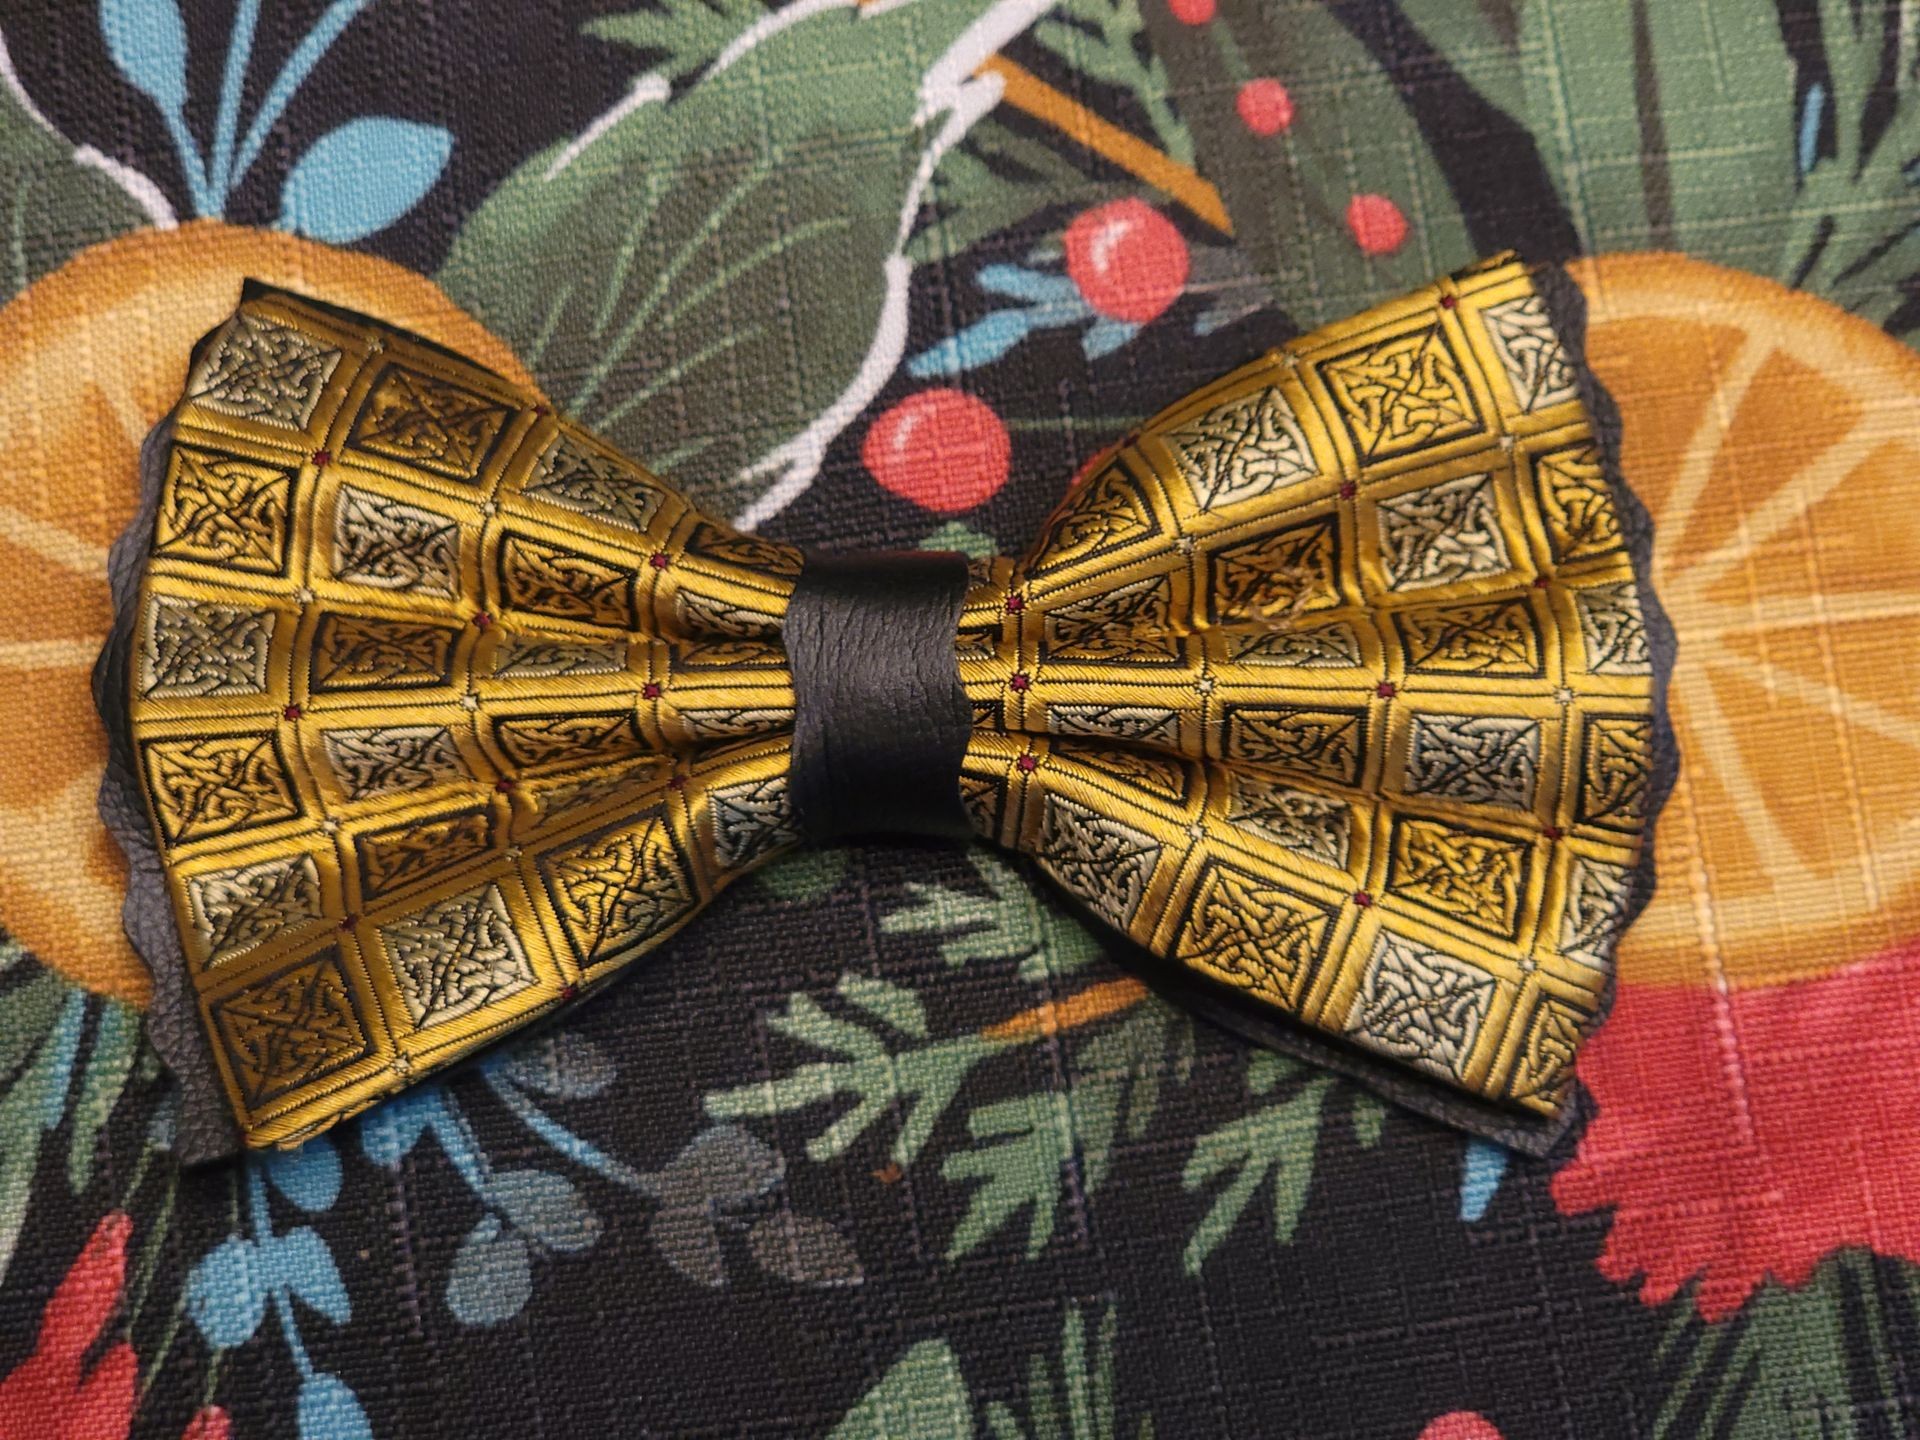 The Vernon BowTie from HipBows